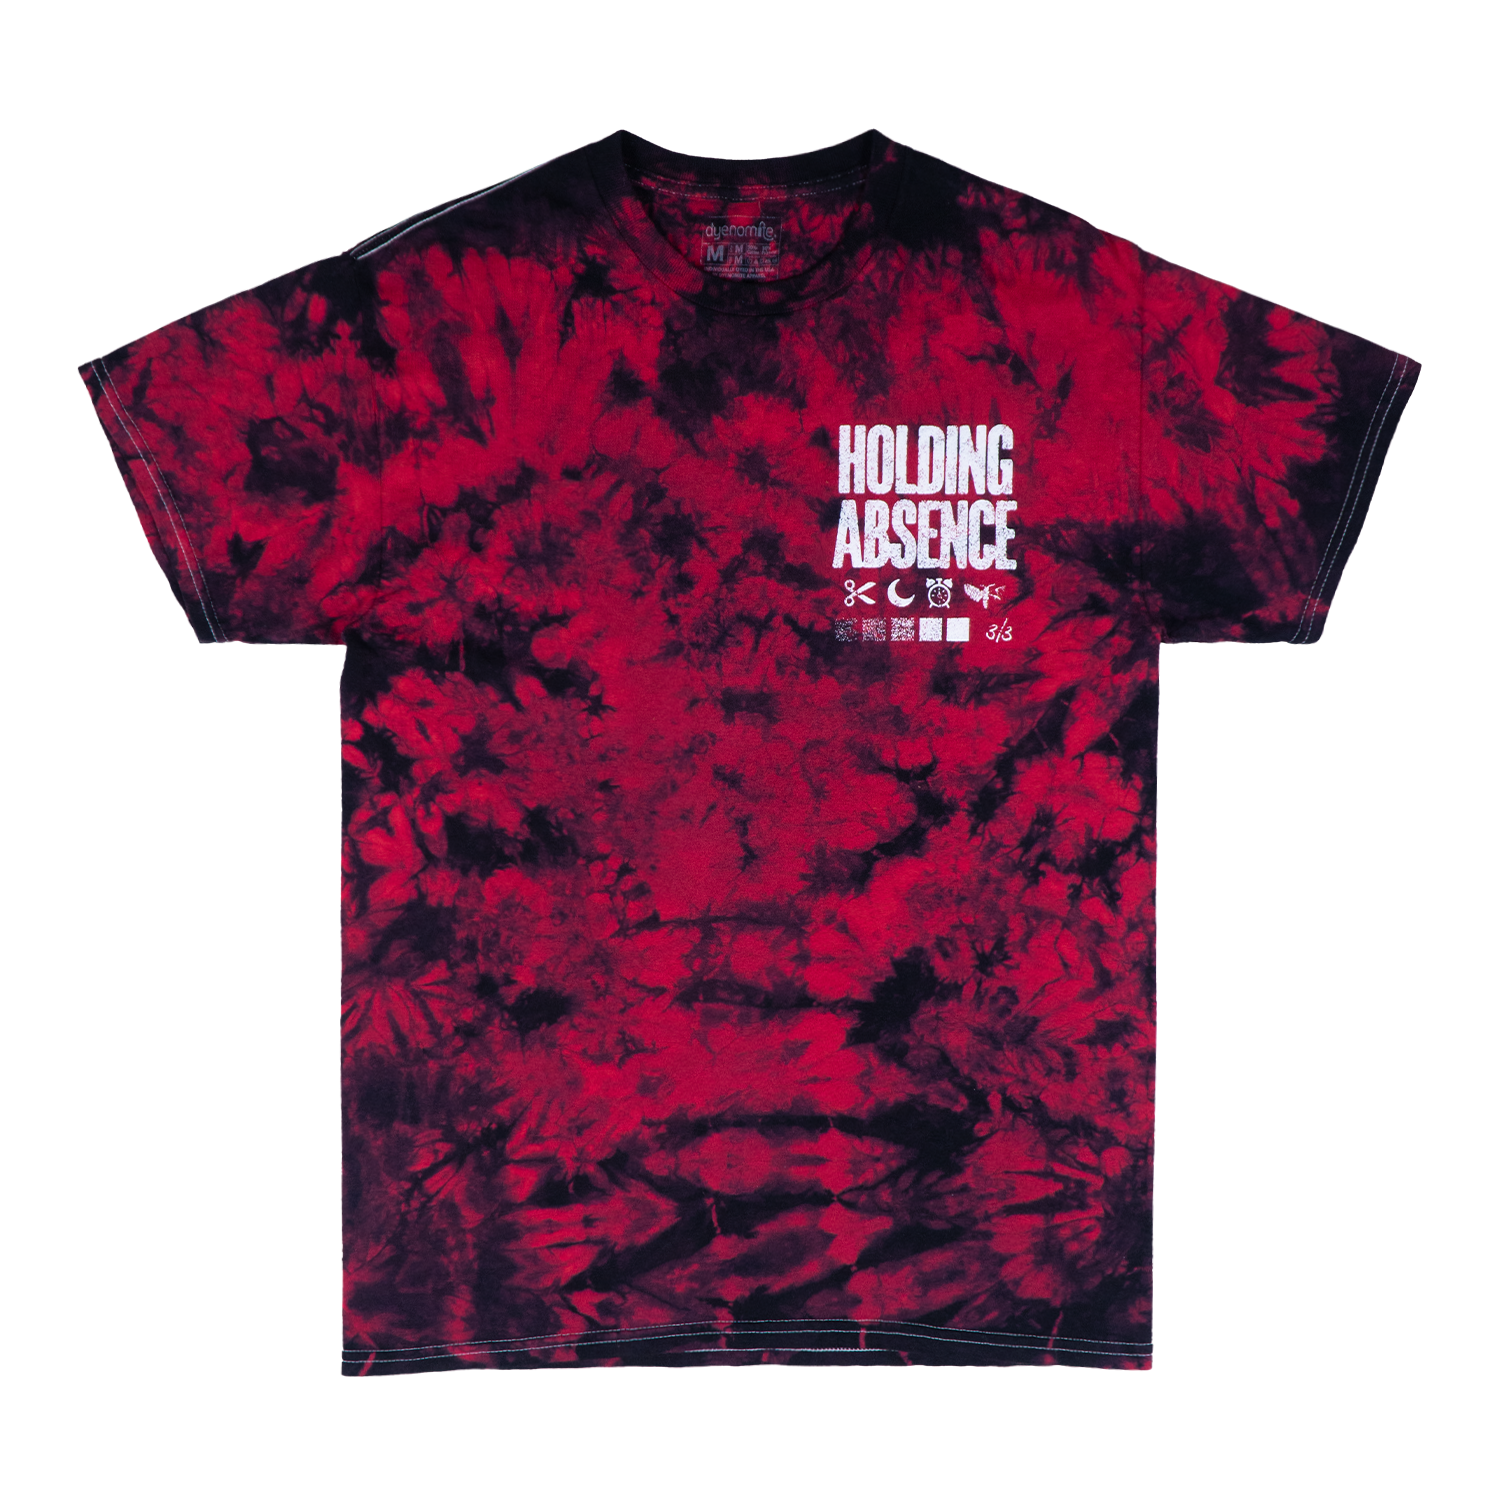 These New Dreams Black/Red Dye Tee